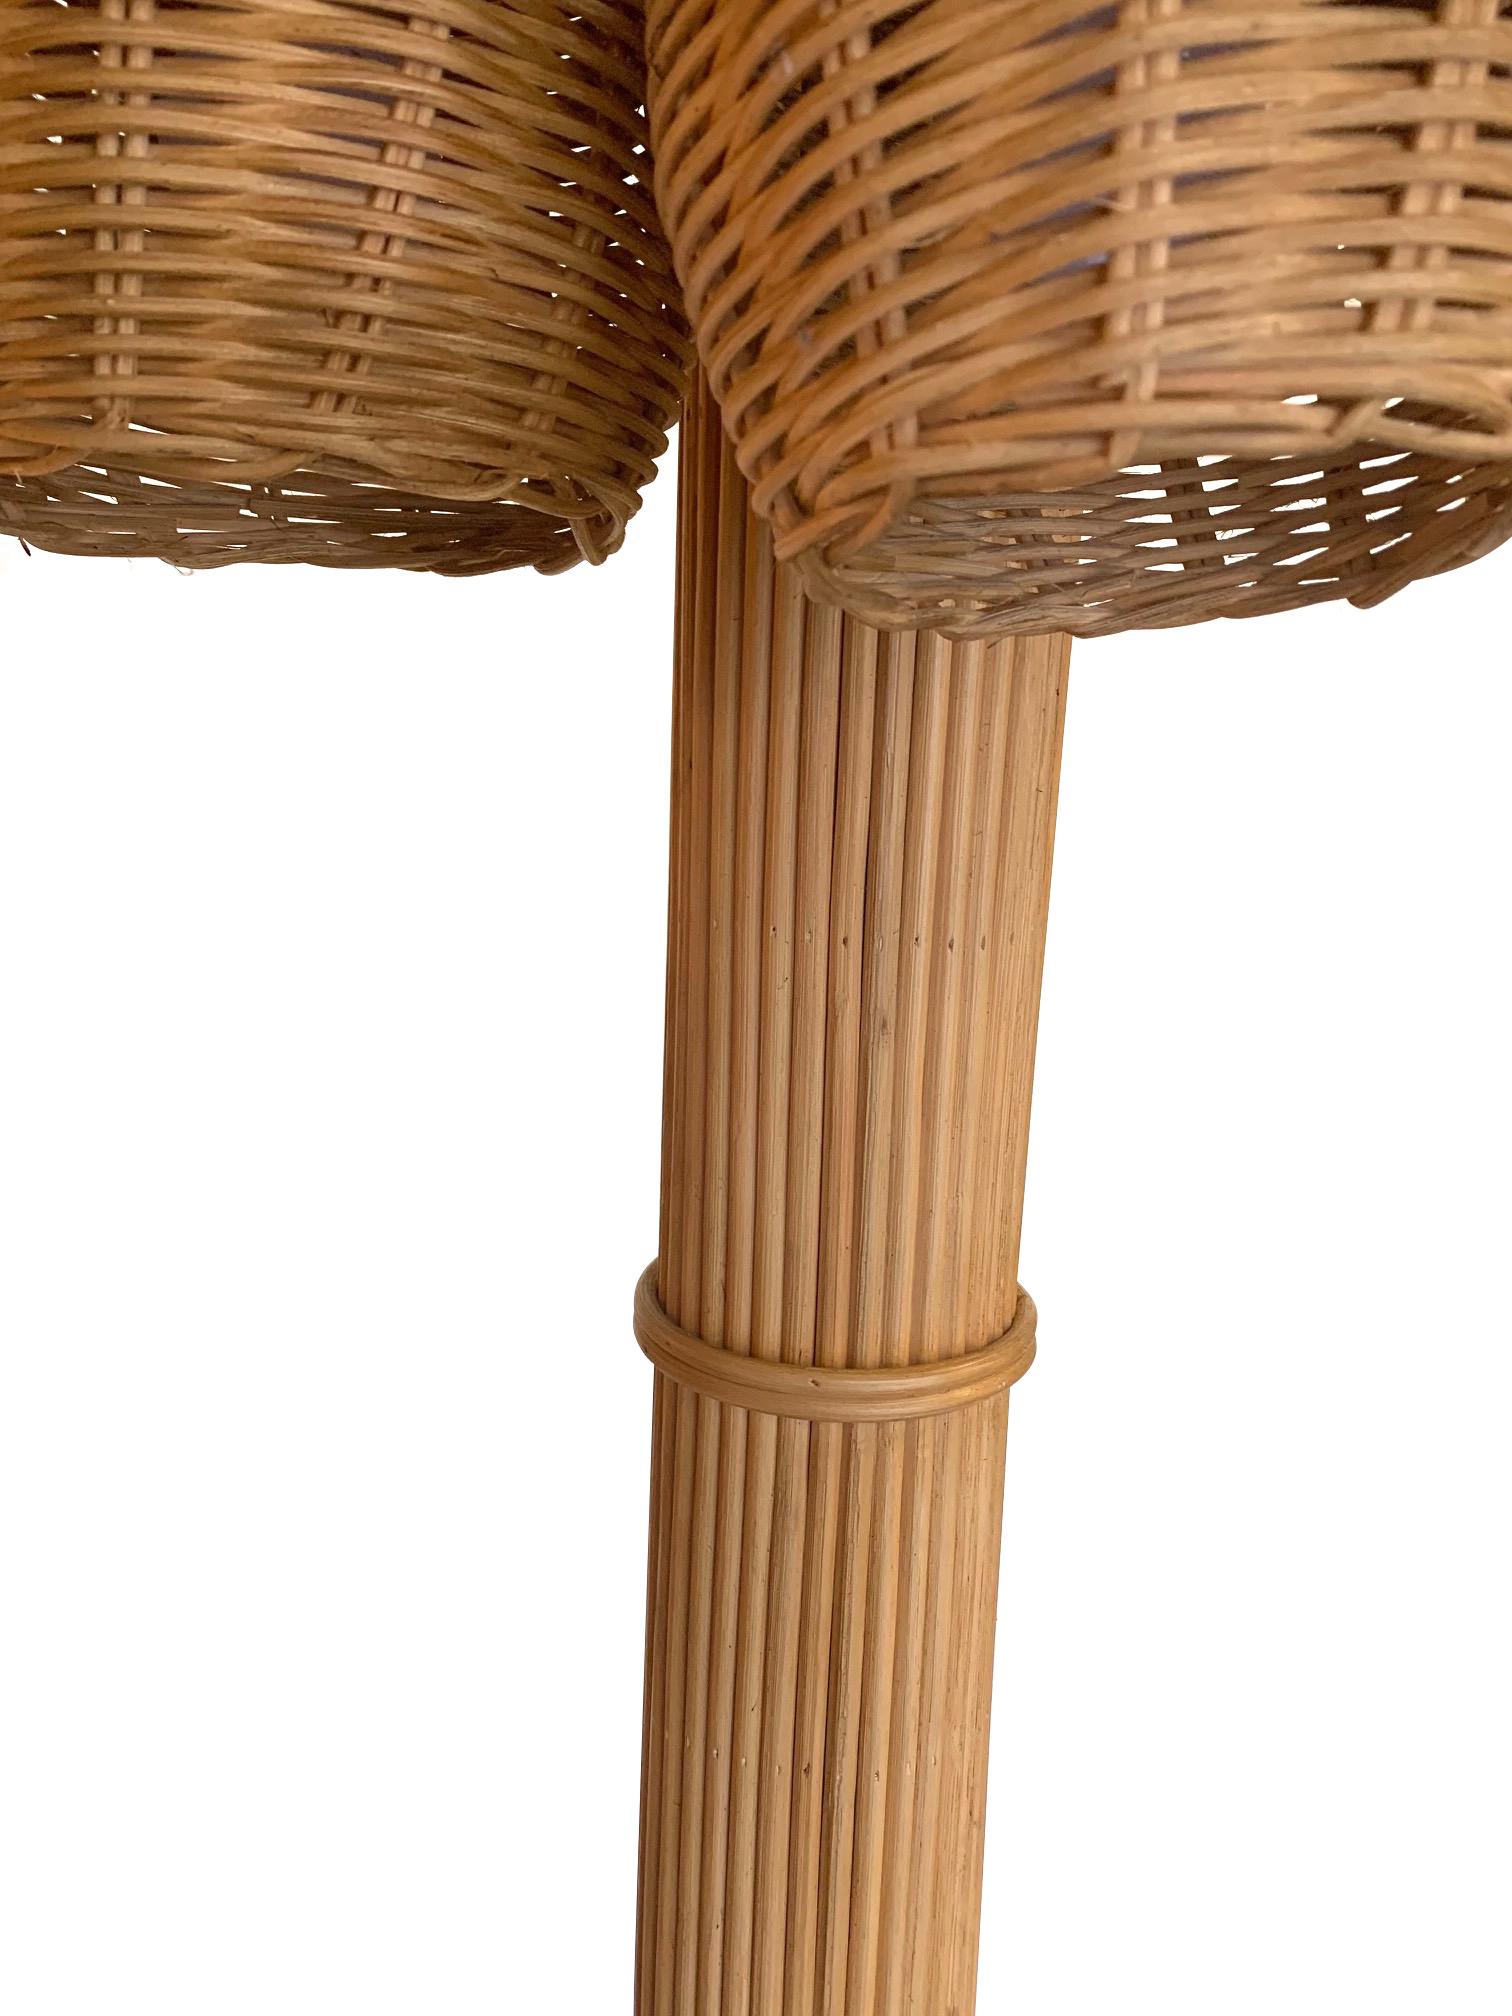 Large Rattan Palm Tree Floor Light, with Three Bulbs in the Coconuts For Sale 2